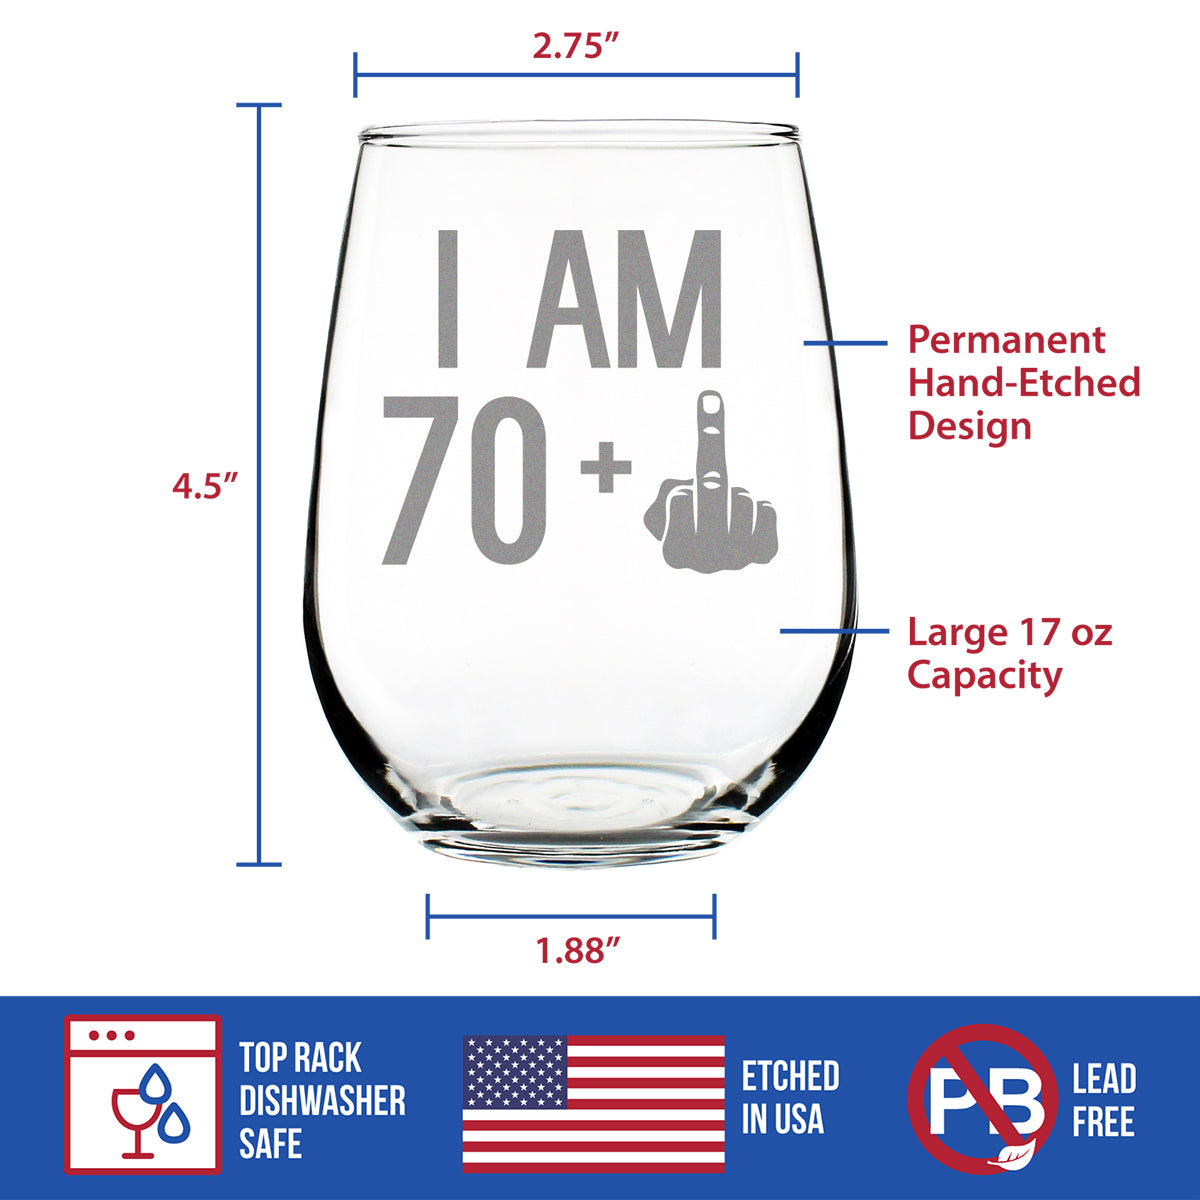 70 + 1 Middle Finger - 71st Birthday Stemless Wine Glass for Women &amp; Men - Cute Funny Wine Gift Idea - Unique Personalized Bday Glasses for Mom, Dad, Friend Turning 71 - Drinking Party Decoration